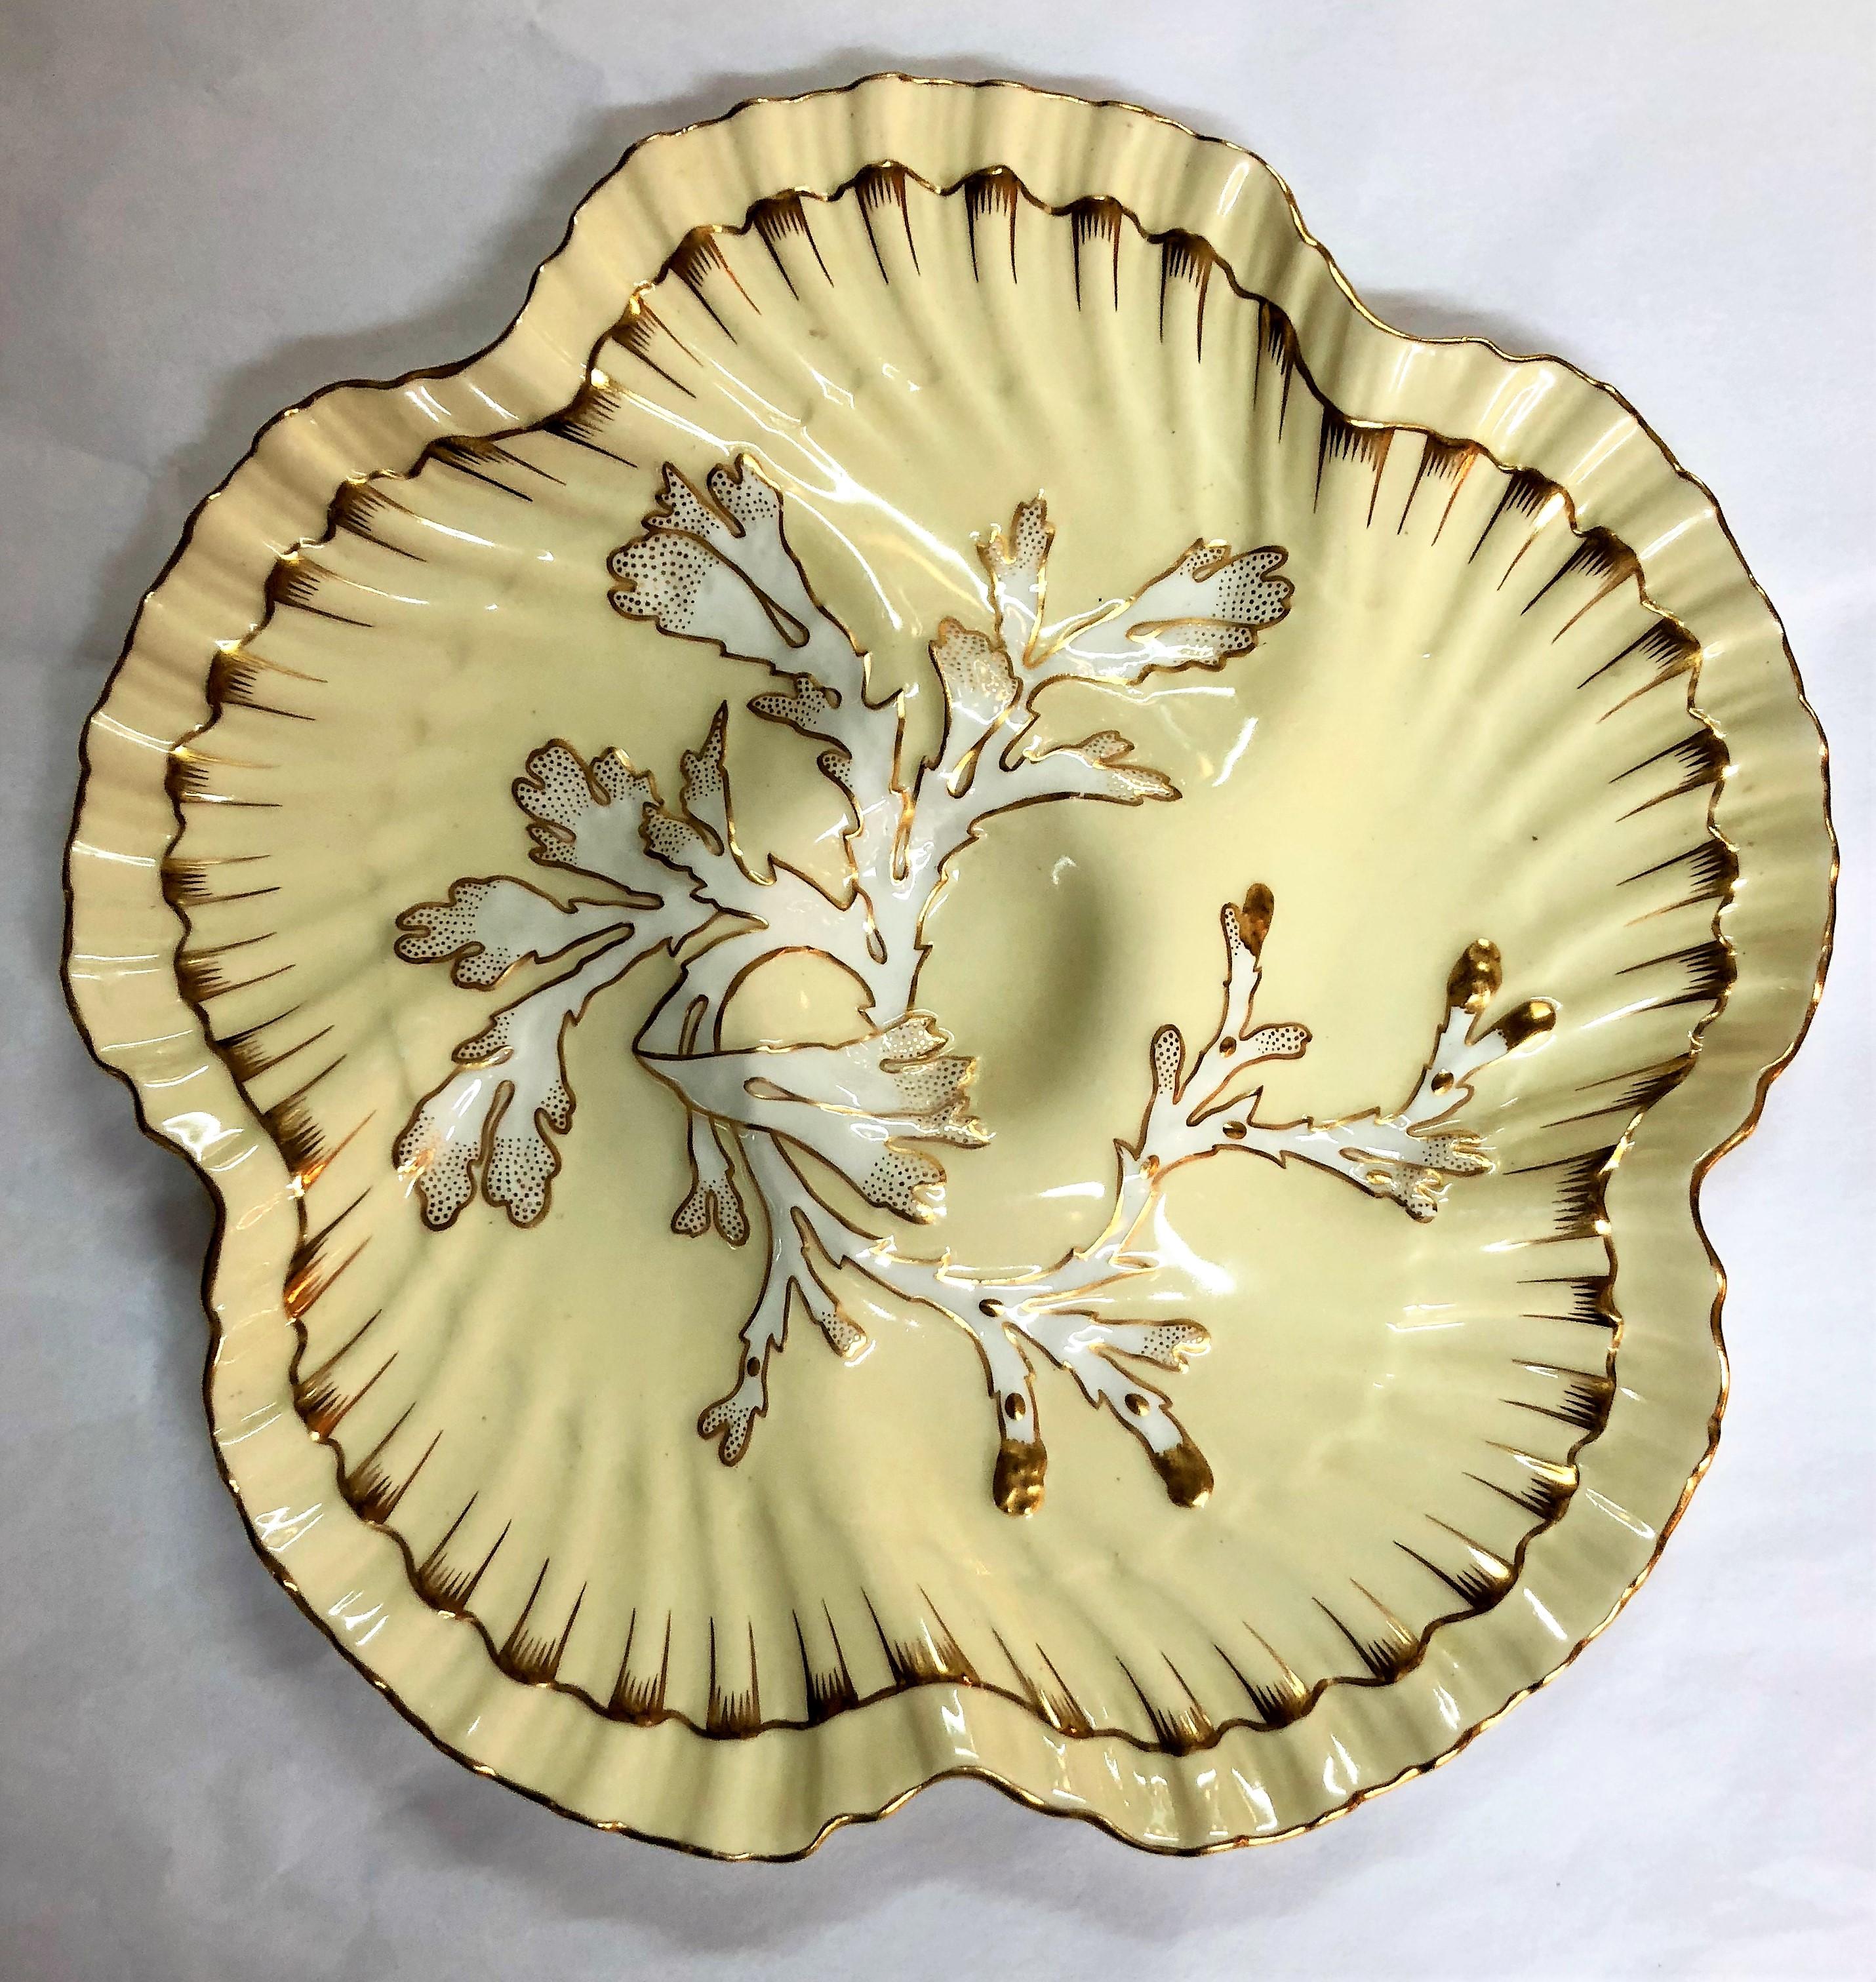 Antique English hand-painted porcelain oyster plate made by [William] Brownfield's China for Tiffany & Co., circa 1890-1900.